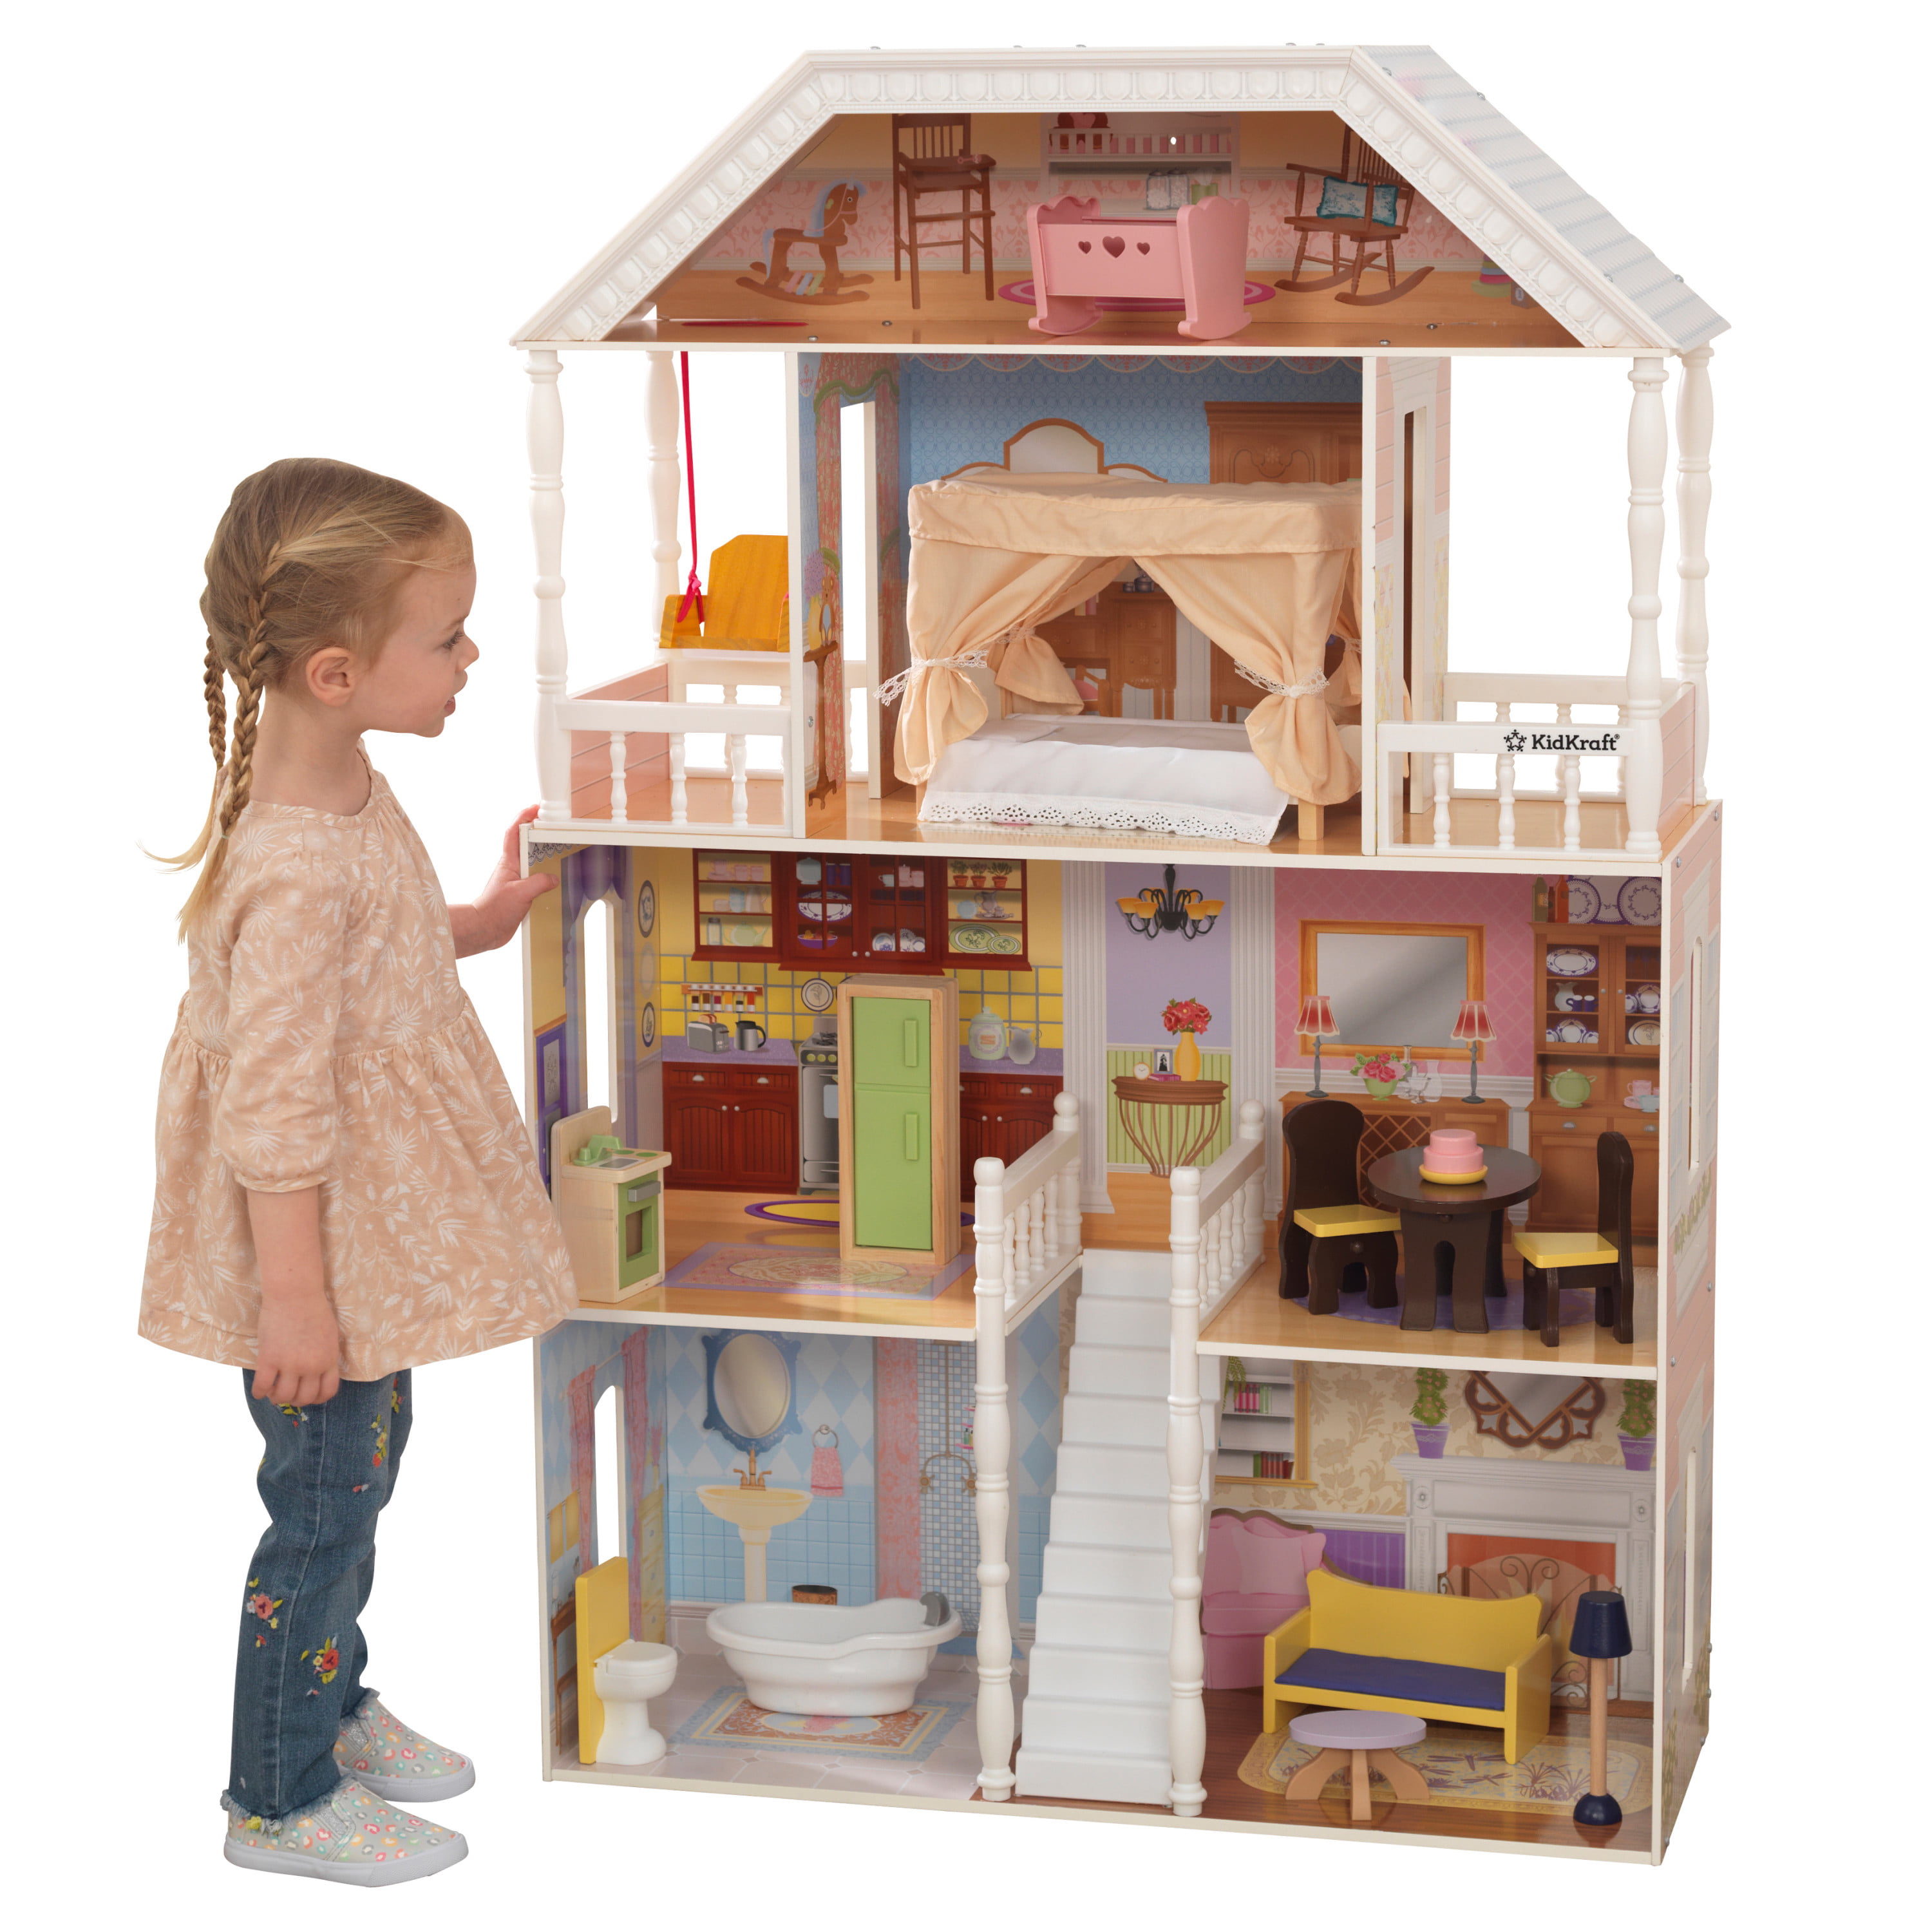 New Wooden Dolls House Accessory Set With Wooden People Figures & Pets Boxed. 